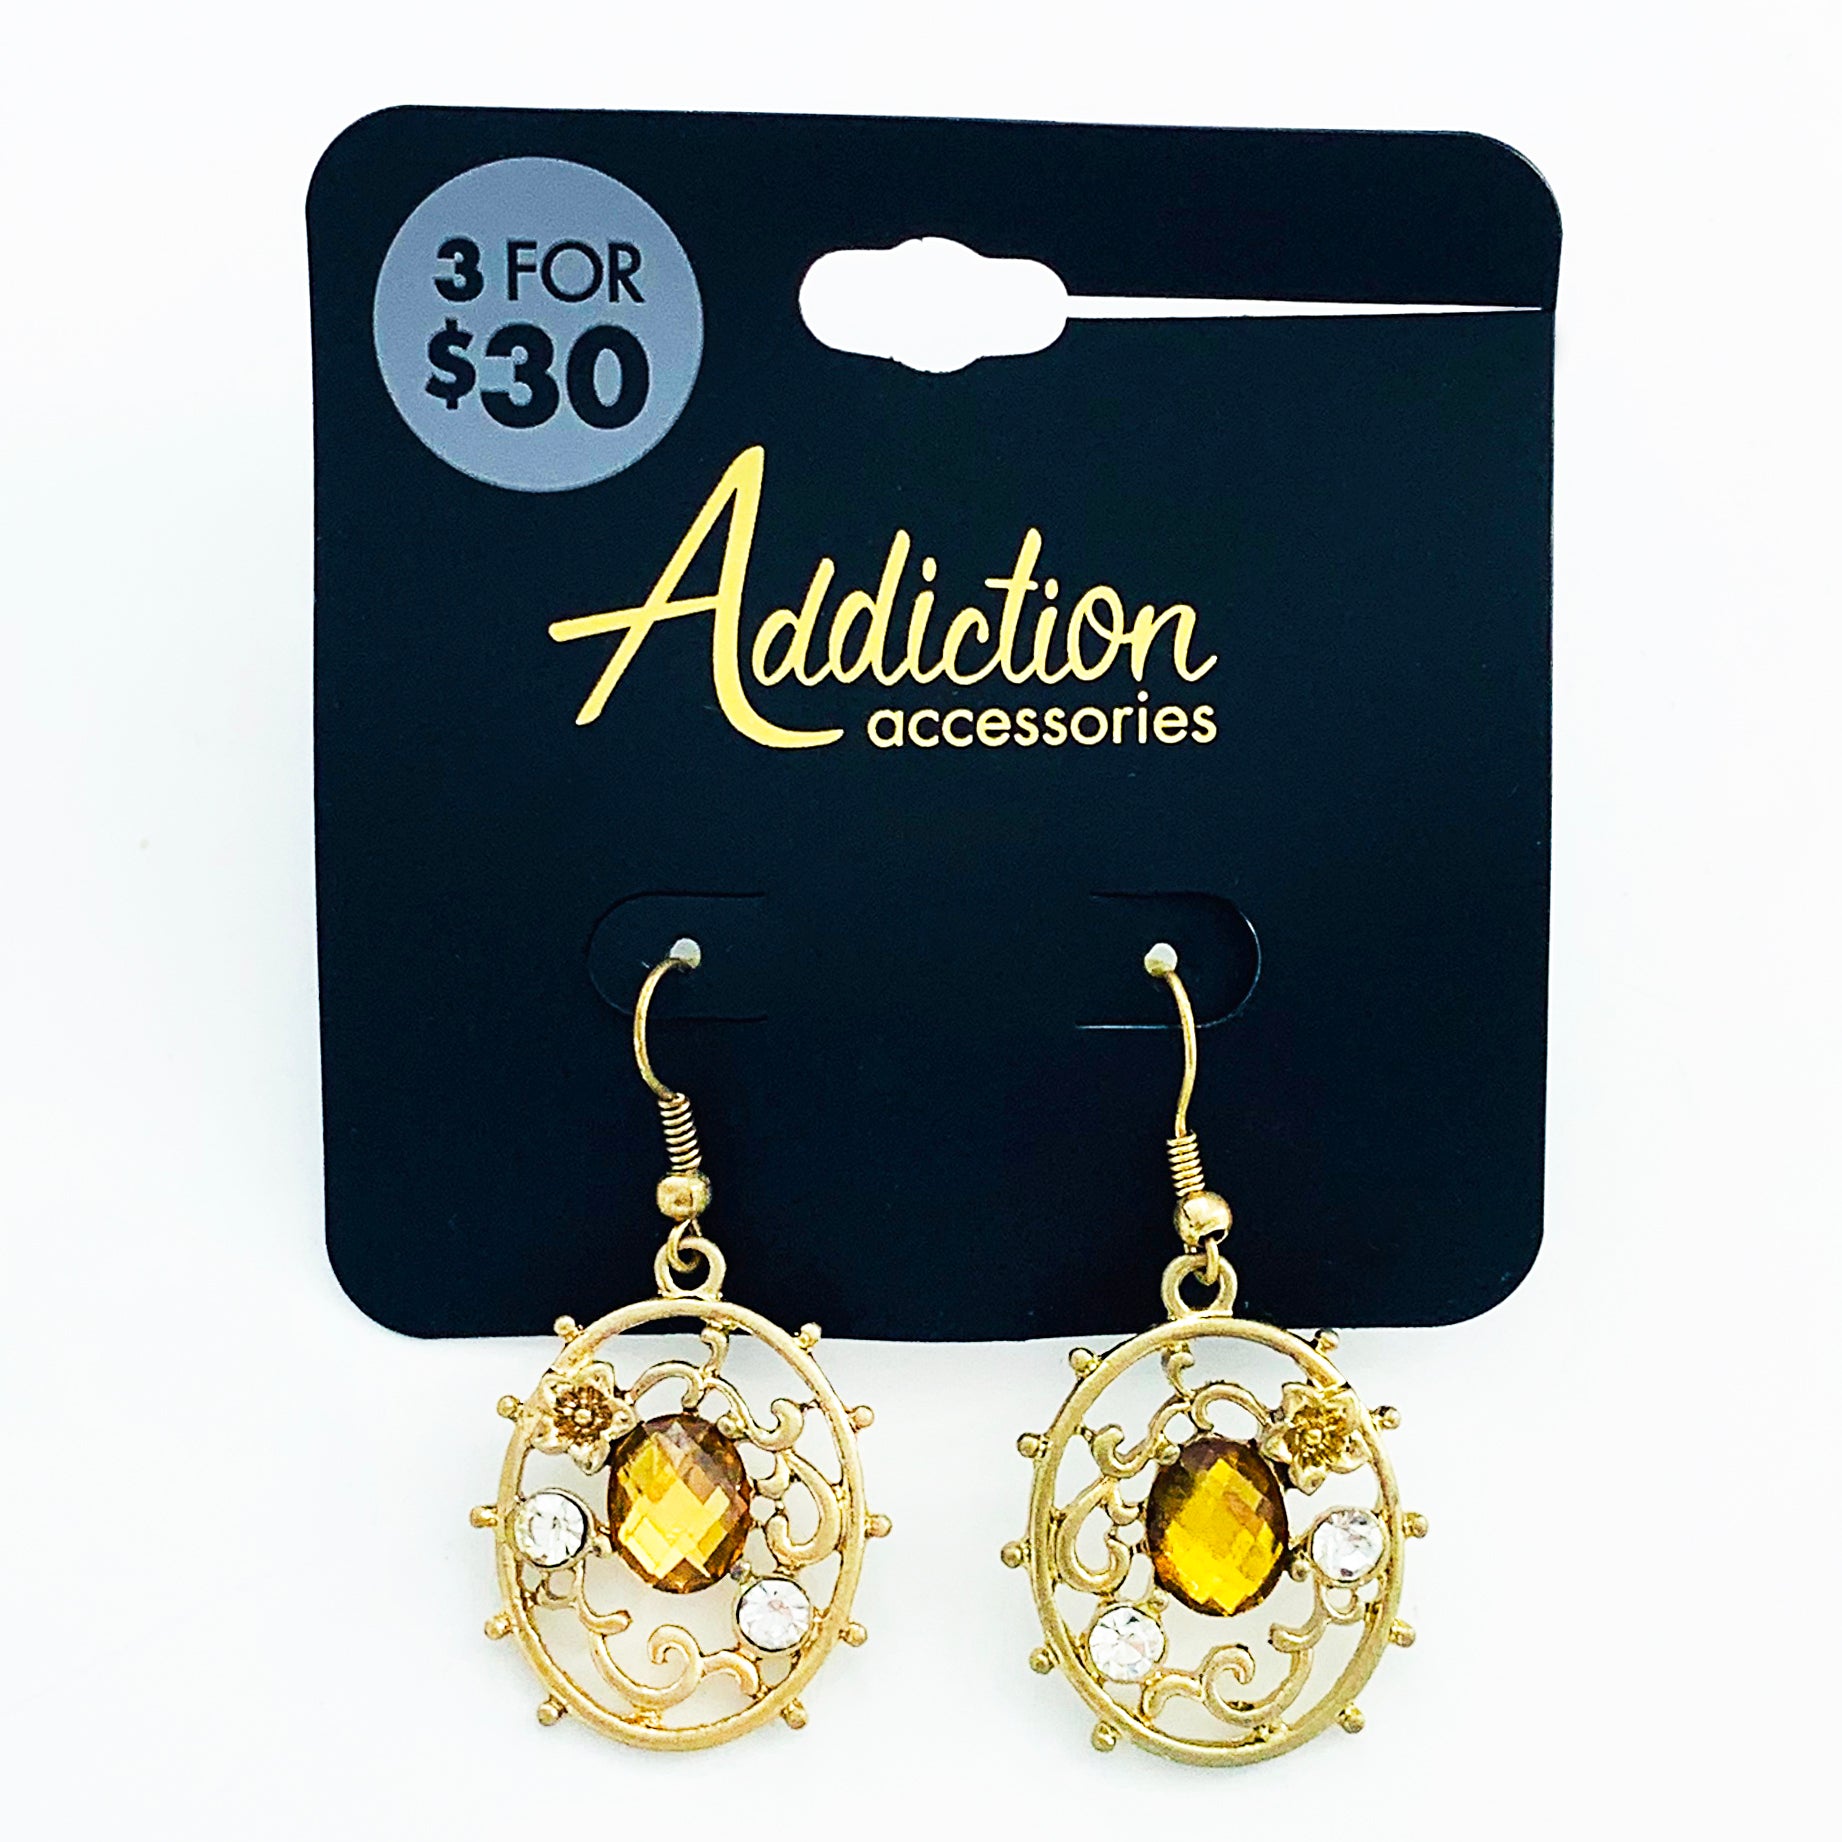 Ornate earrings with yellow facet gems